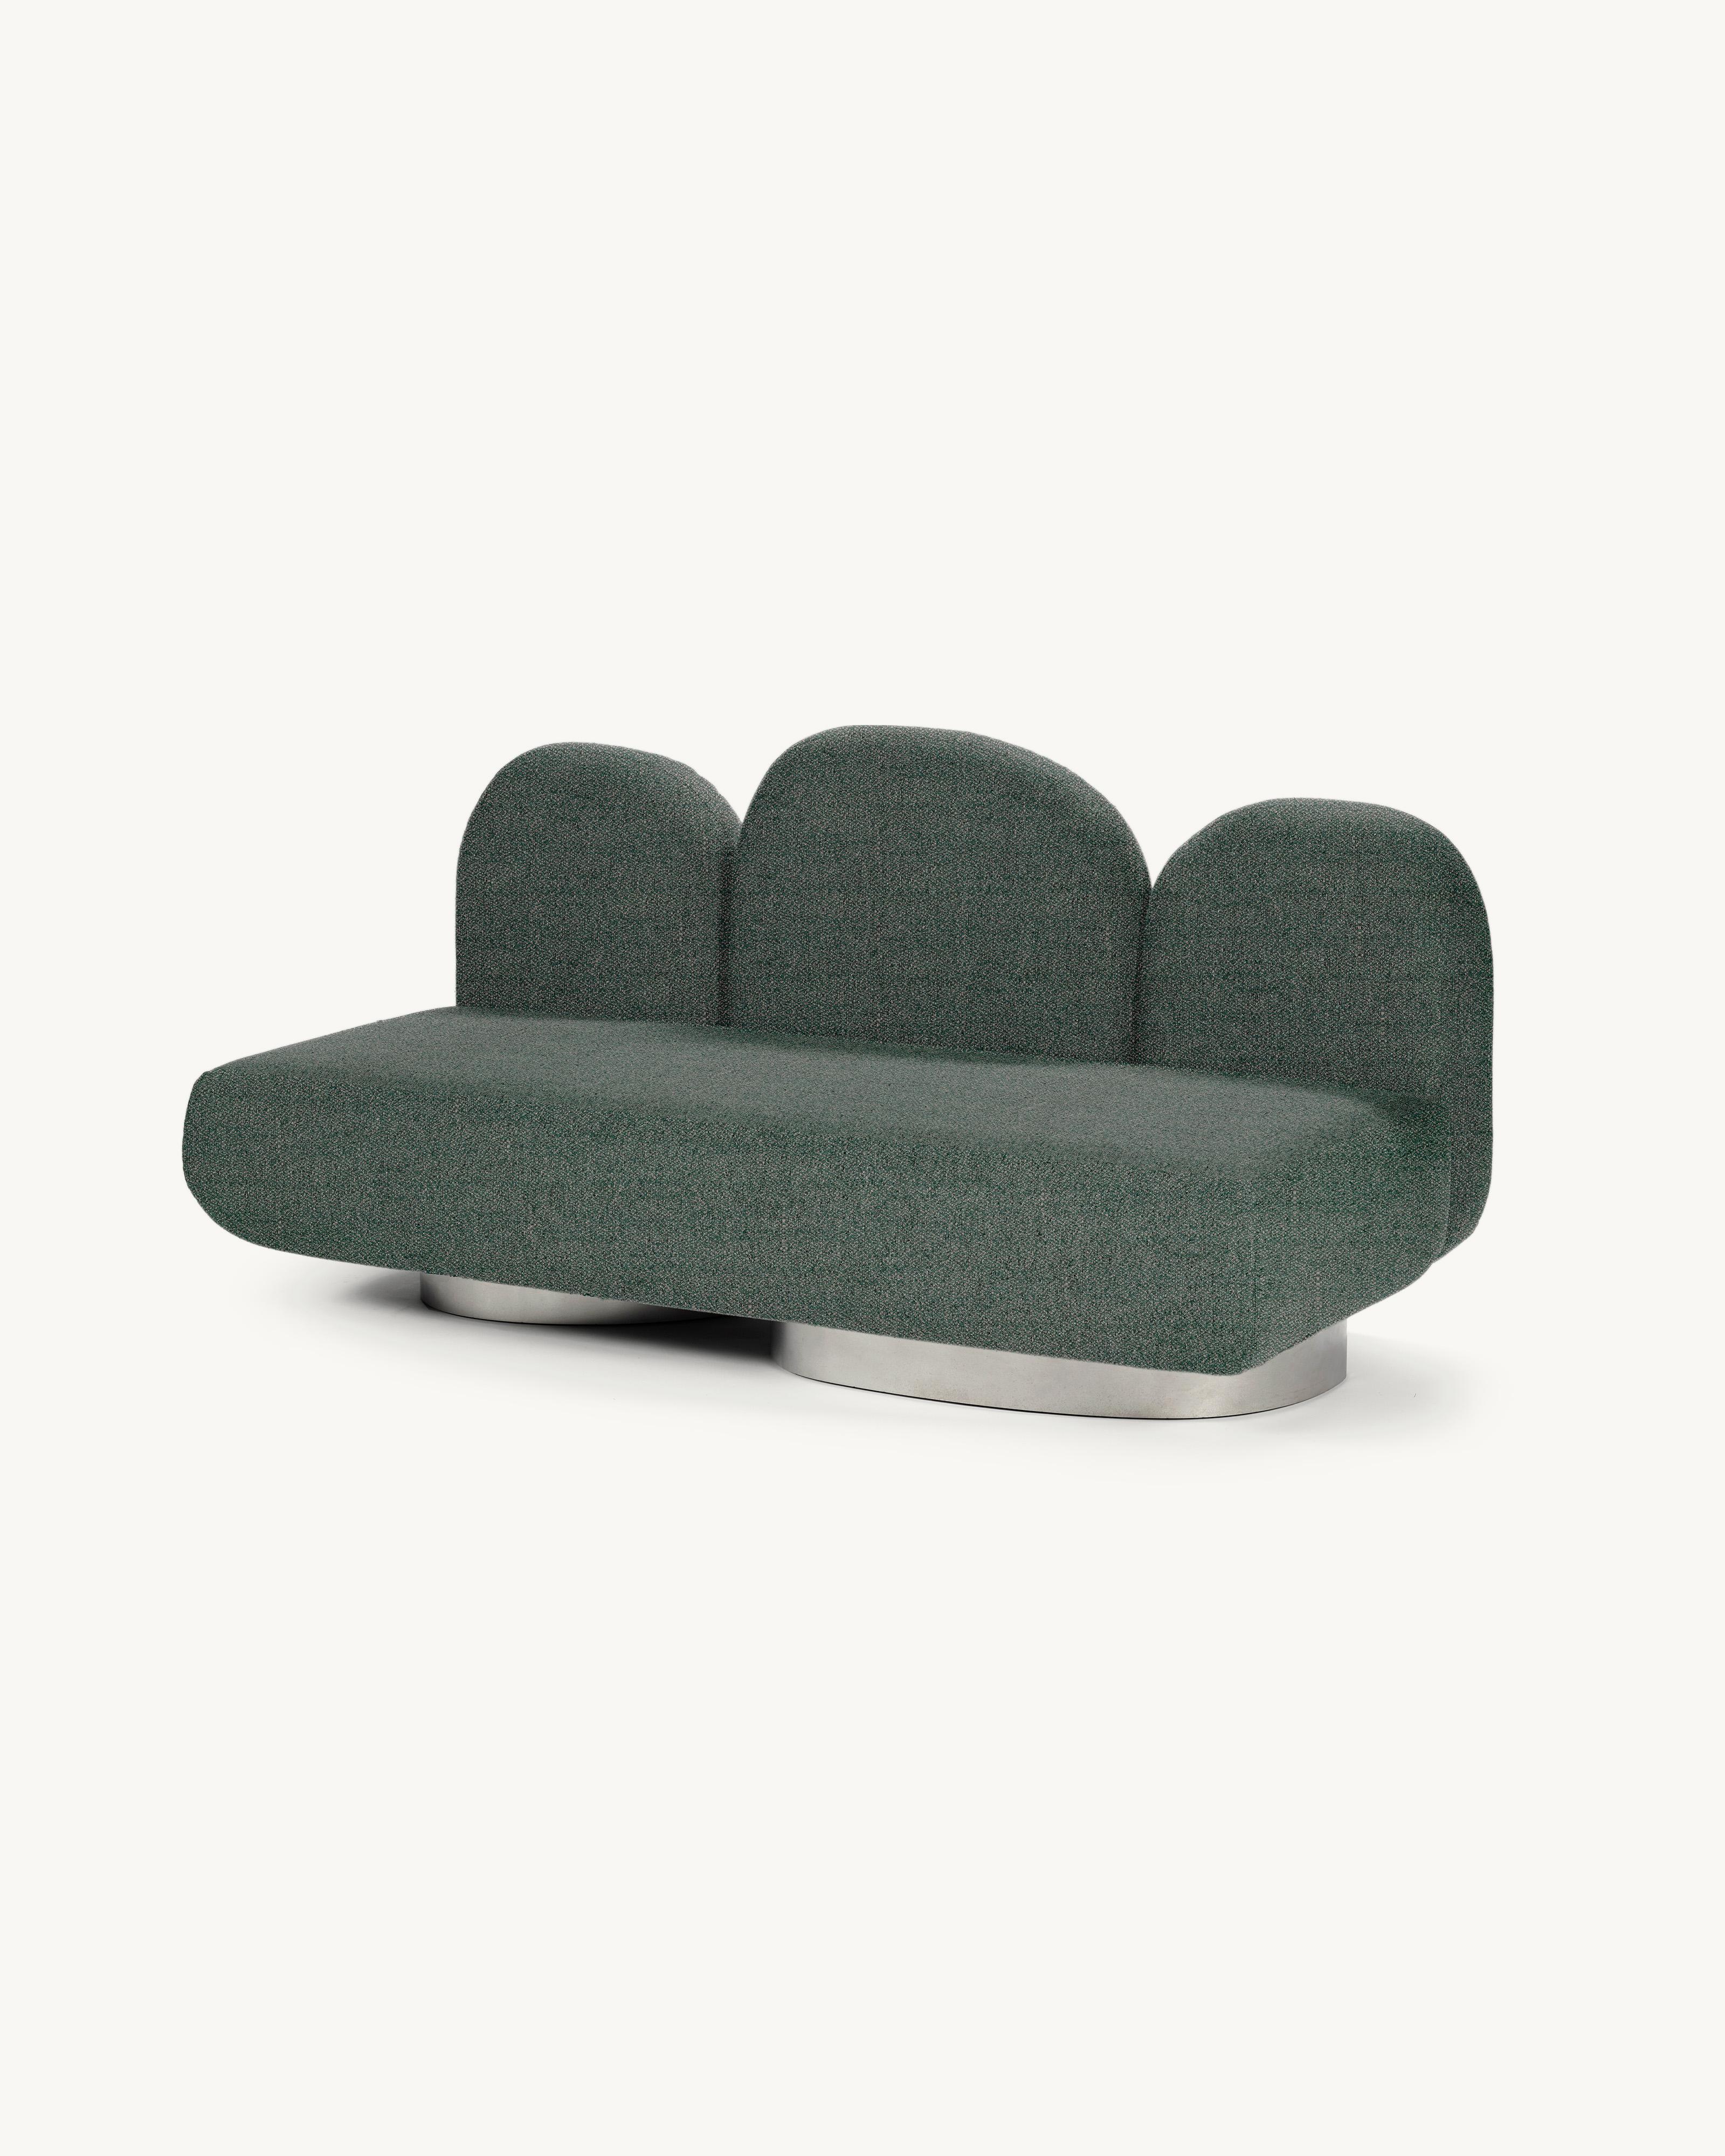 Modular Sofa Assemble, 2 seaters 
Designed by Destroyers/Builders x Valerie Objects
Upholstery: bangar sand 

Code: V9020360

Dimensions: L 87 W 174 H 85CM (SH 40 cm)
Materials: Wood, aluminium and upholstery

The ASSEMBLE sofa encourages exactly